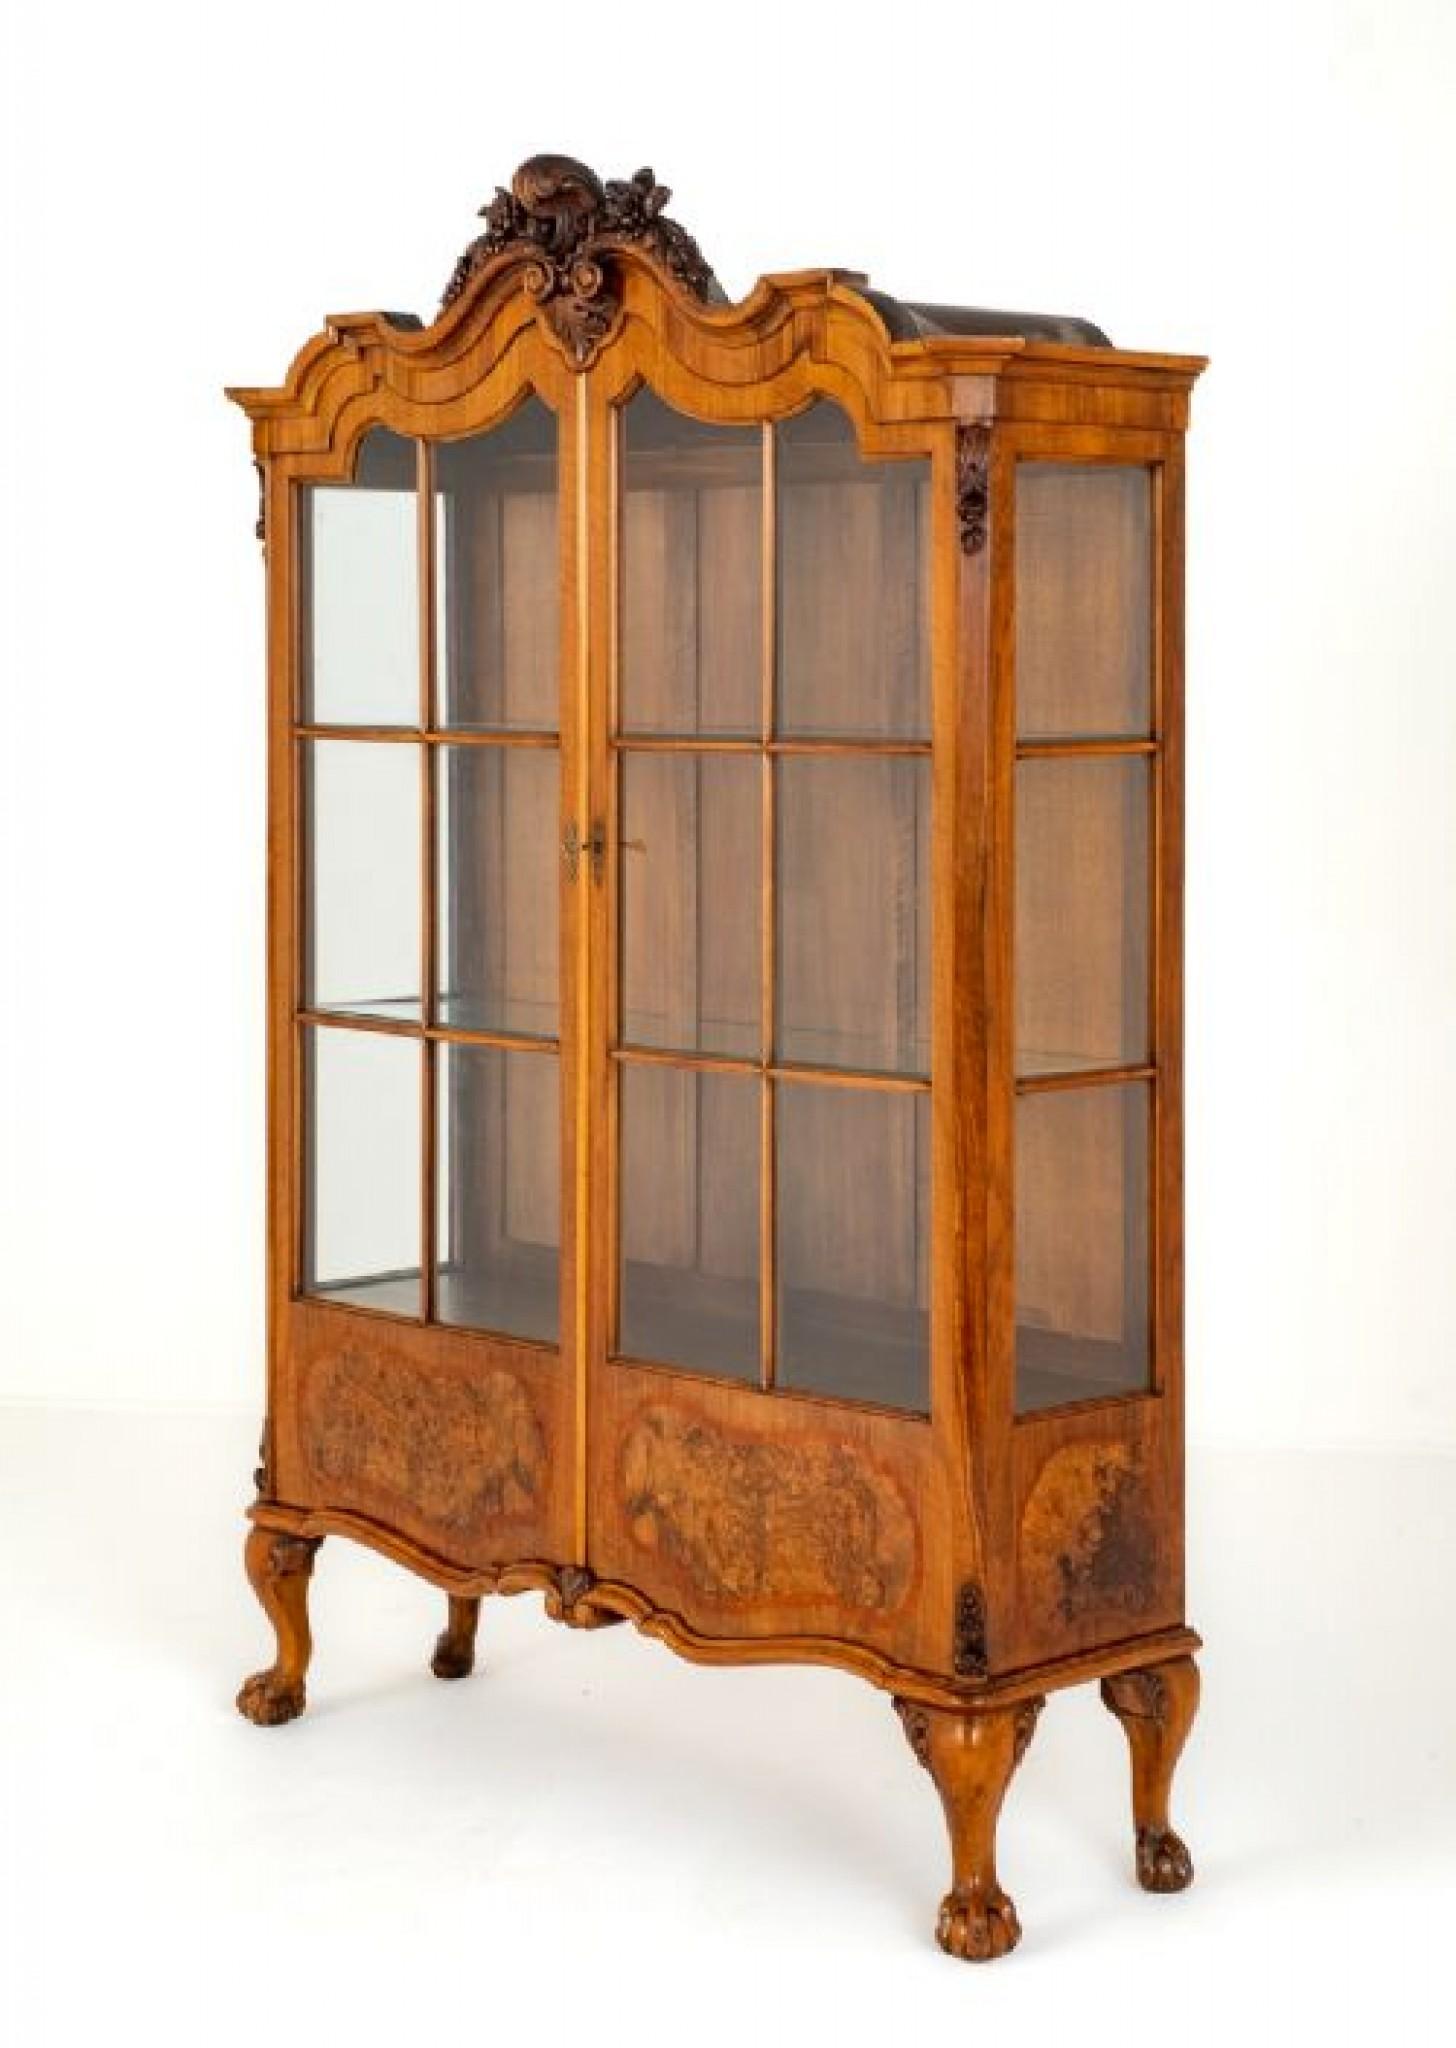 Good quality Queen Anne style walnut display cabinet.
This cabinet stands upon short cabriole legs with well carved ball and claw feet.
1880
The piece features 2 glazed doors, each door having shaped burr walnut panels with satinwood cross